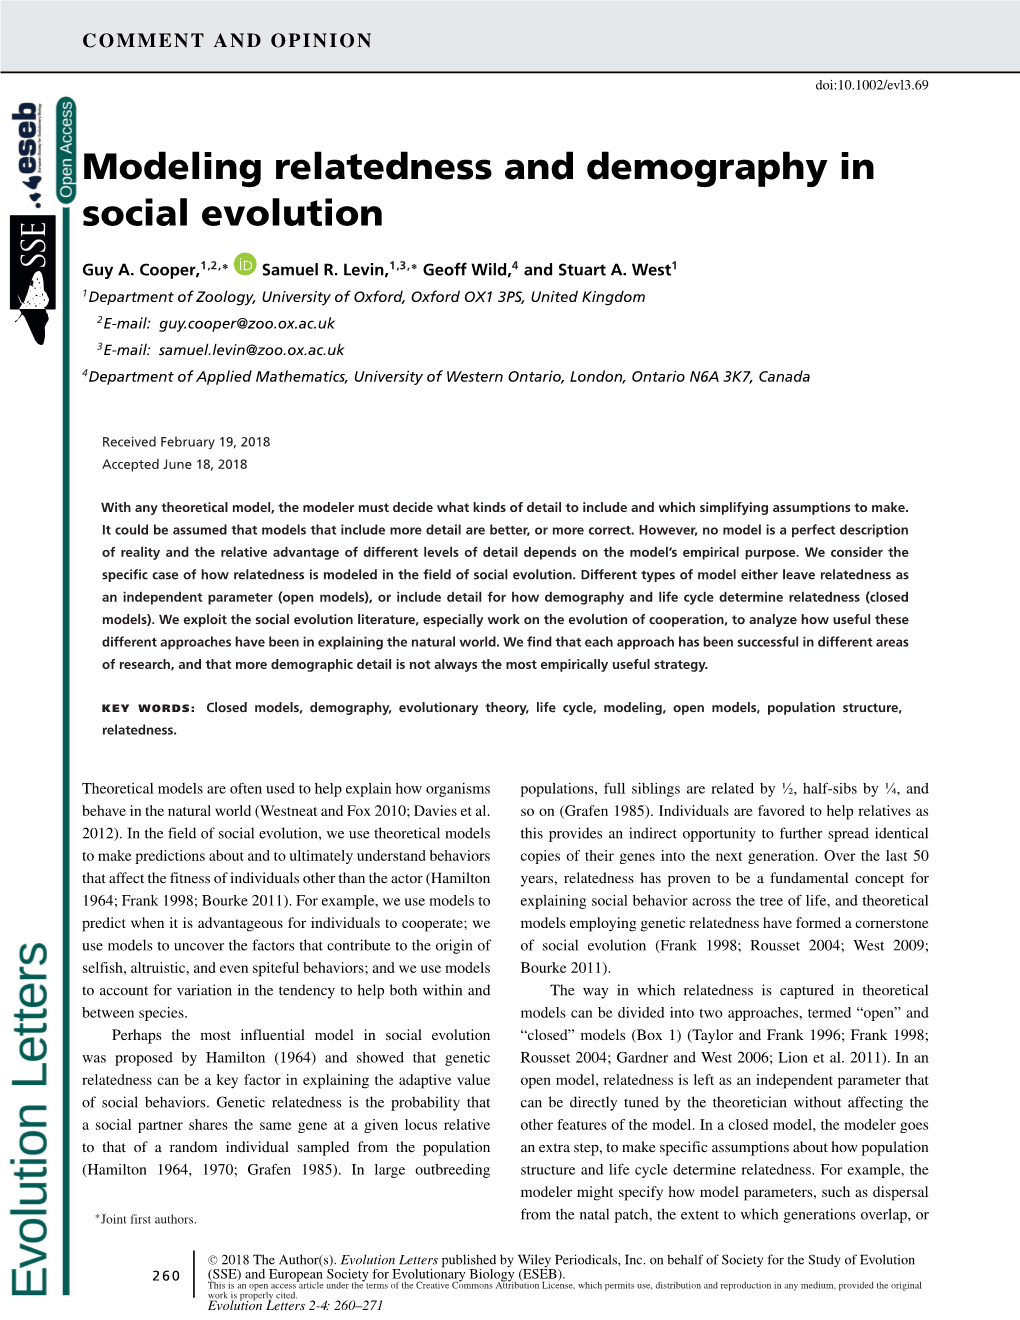 Modeling Relatedness and Demography in Social Evolution